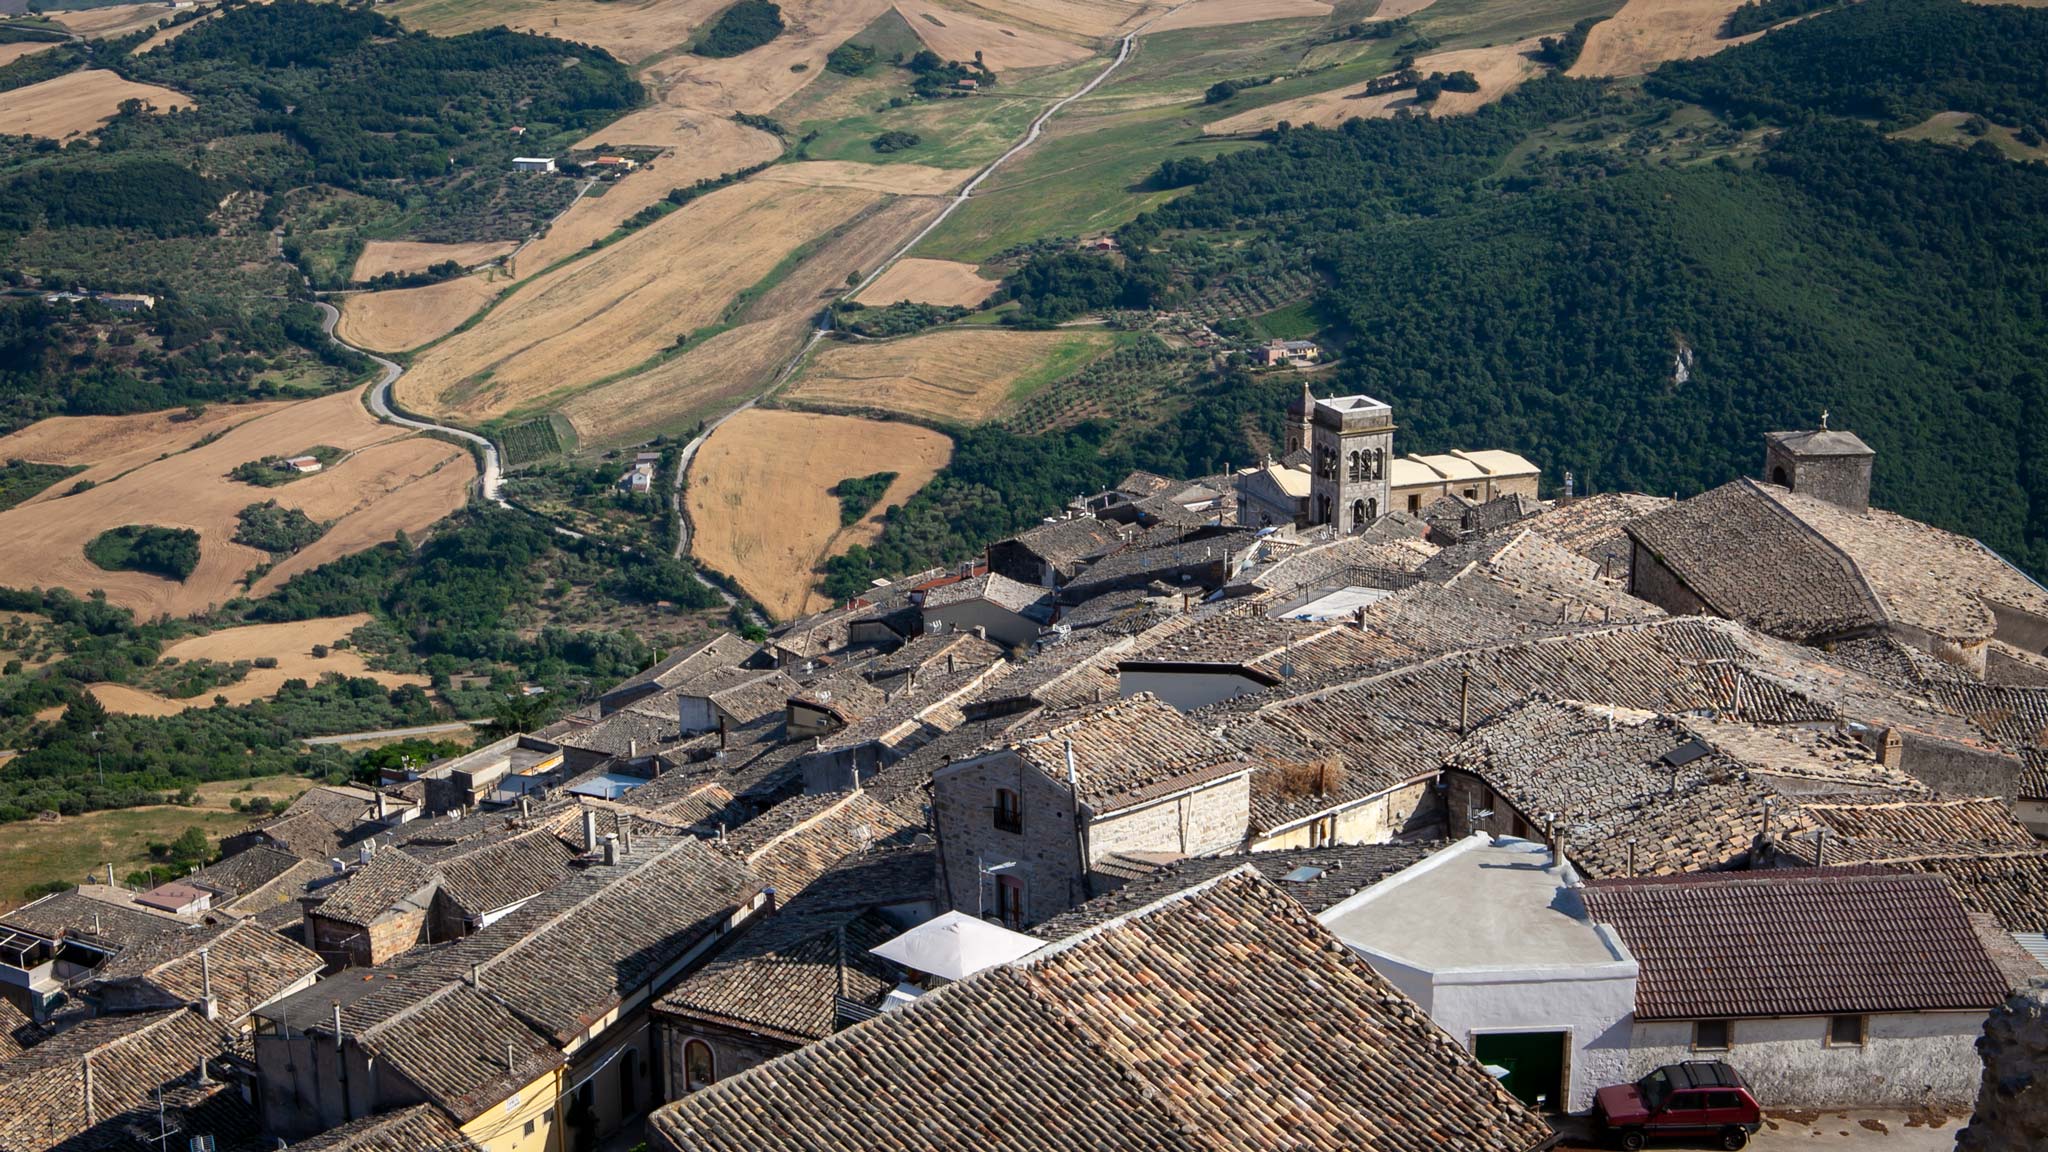 The rooftops of Sant'Agata di Puglia town with green hills in the background